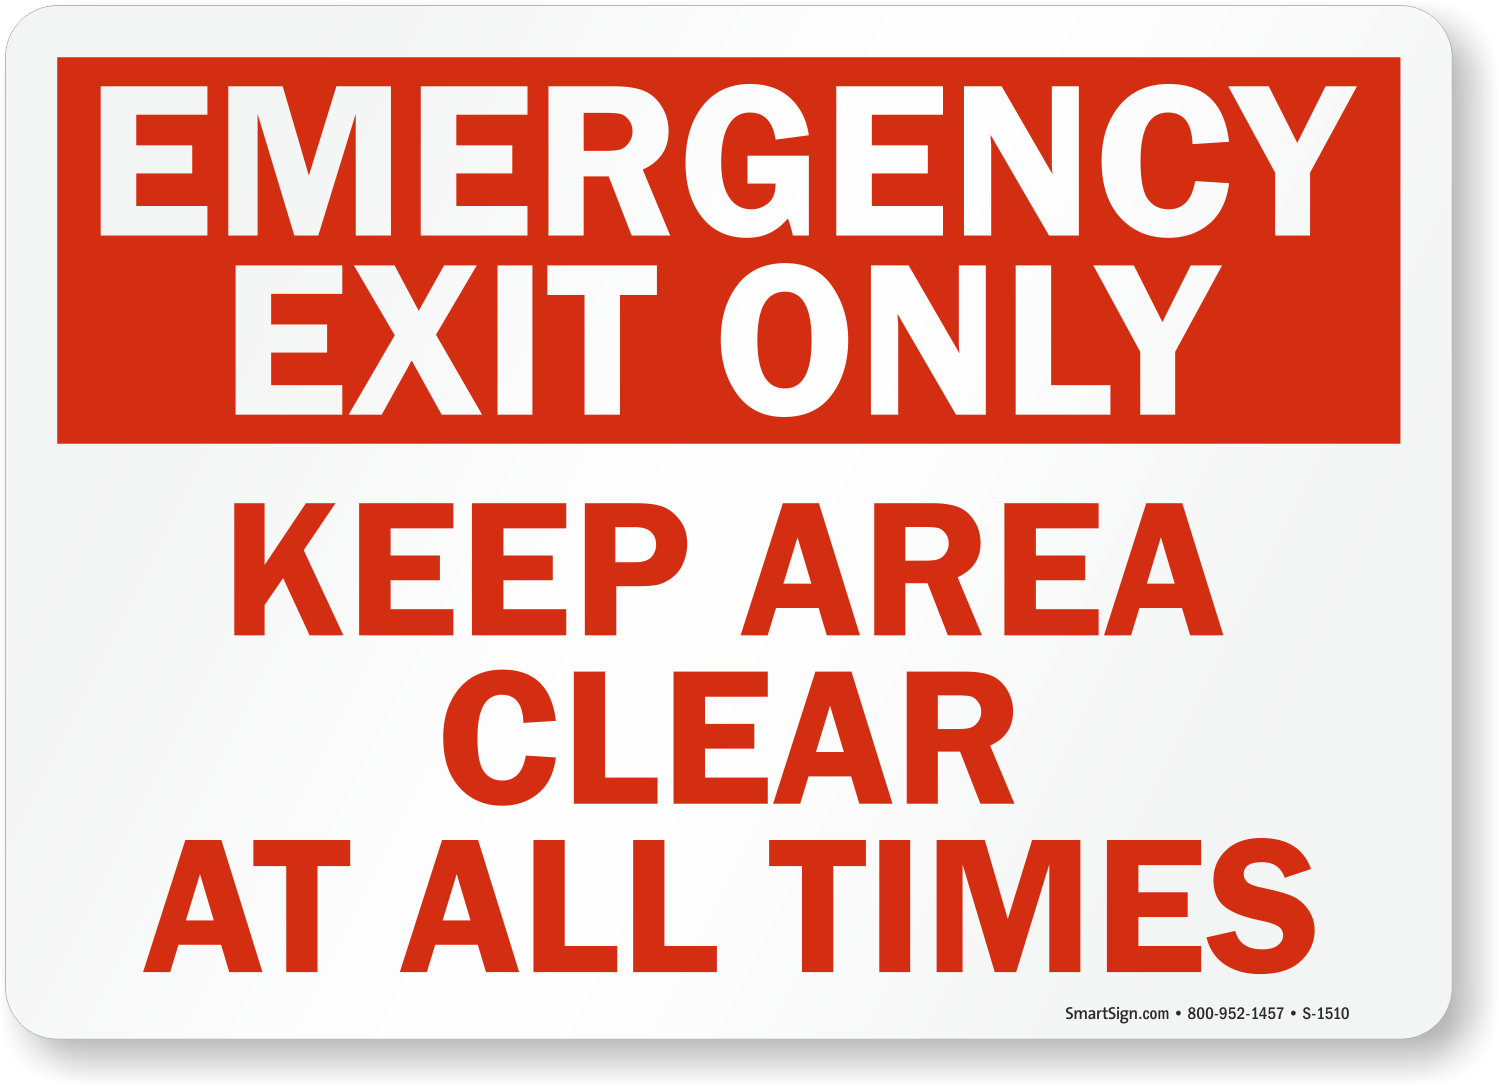 https://www.mydoorsign.com/img/lg/S/fire-emergency-exit-area-clear-sign-s-1510.png